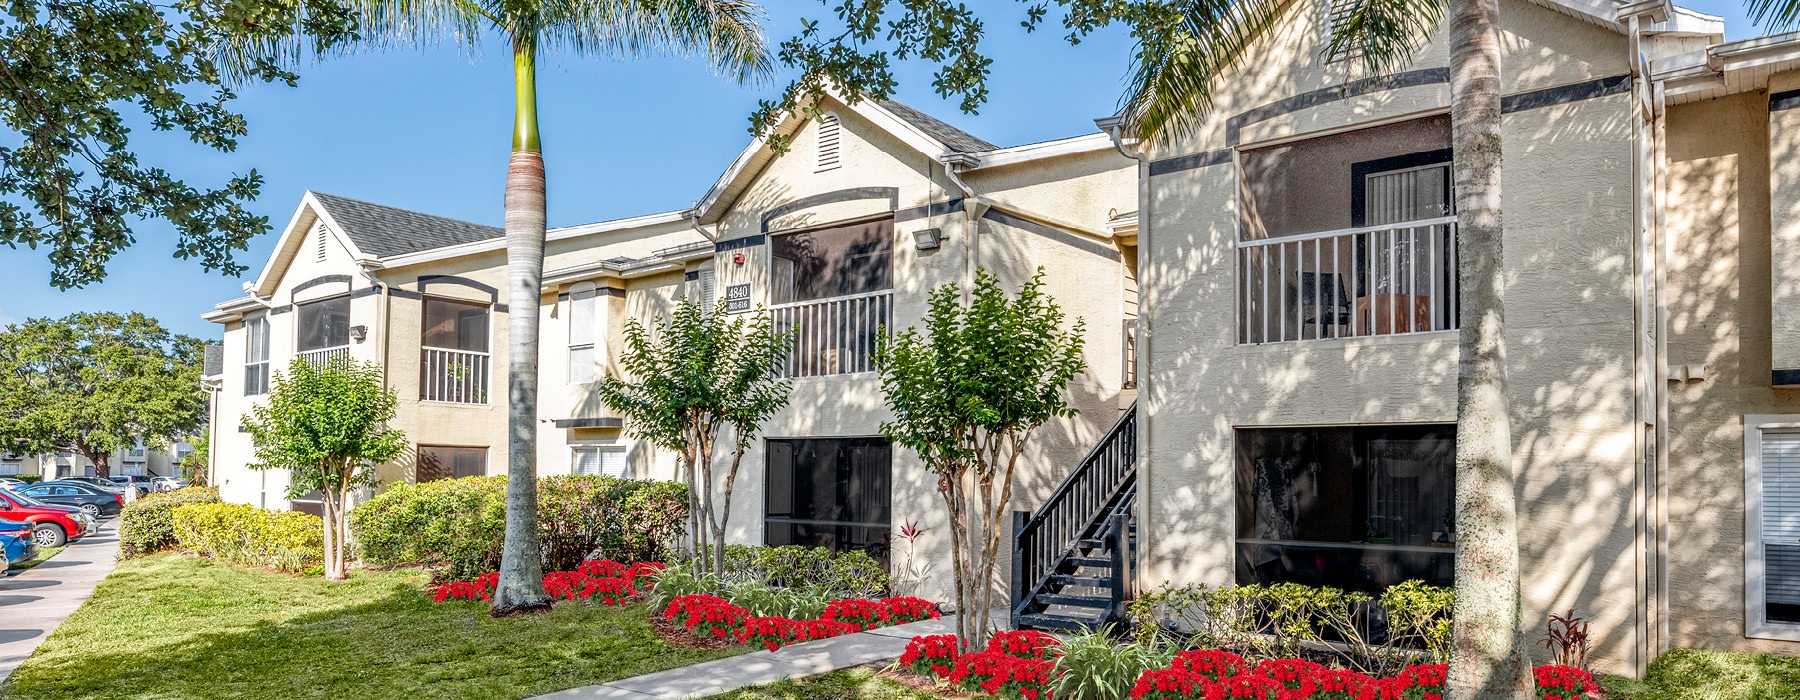 two story Sawgrass Cove apartment buildings with private balconies and screened patios